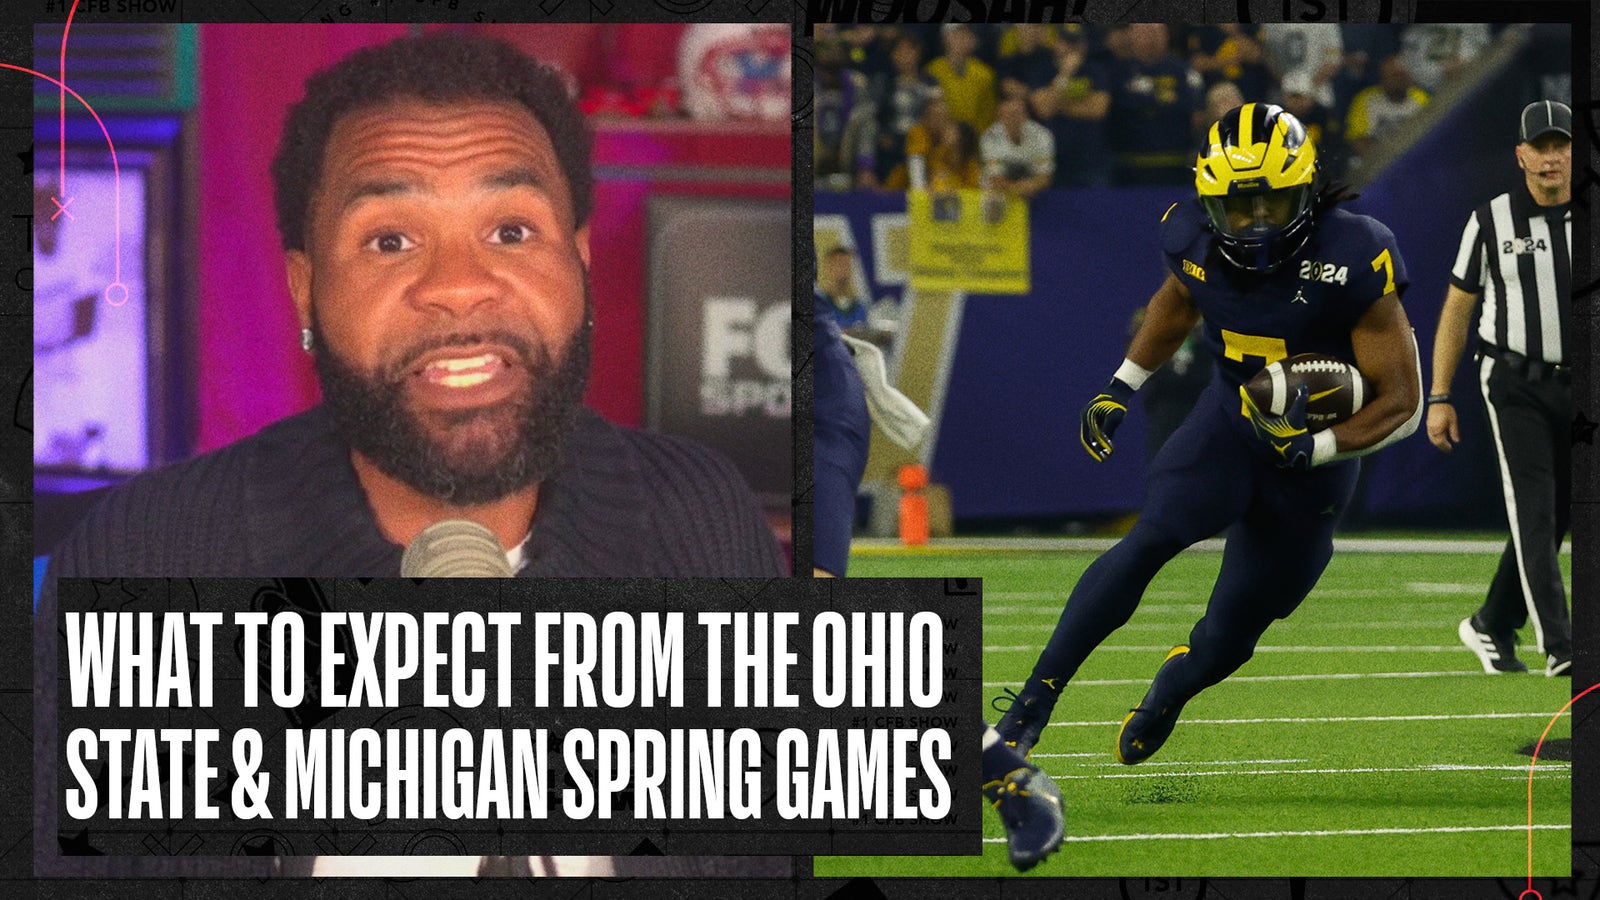 Ohio State & Michigan’s spring games will be on FOX: Here's what to expect